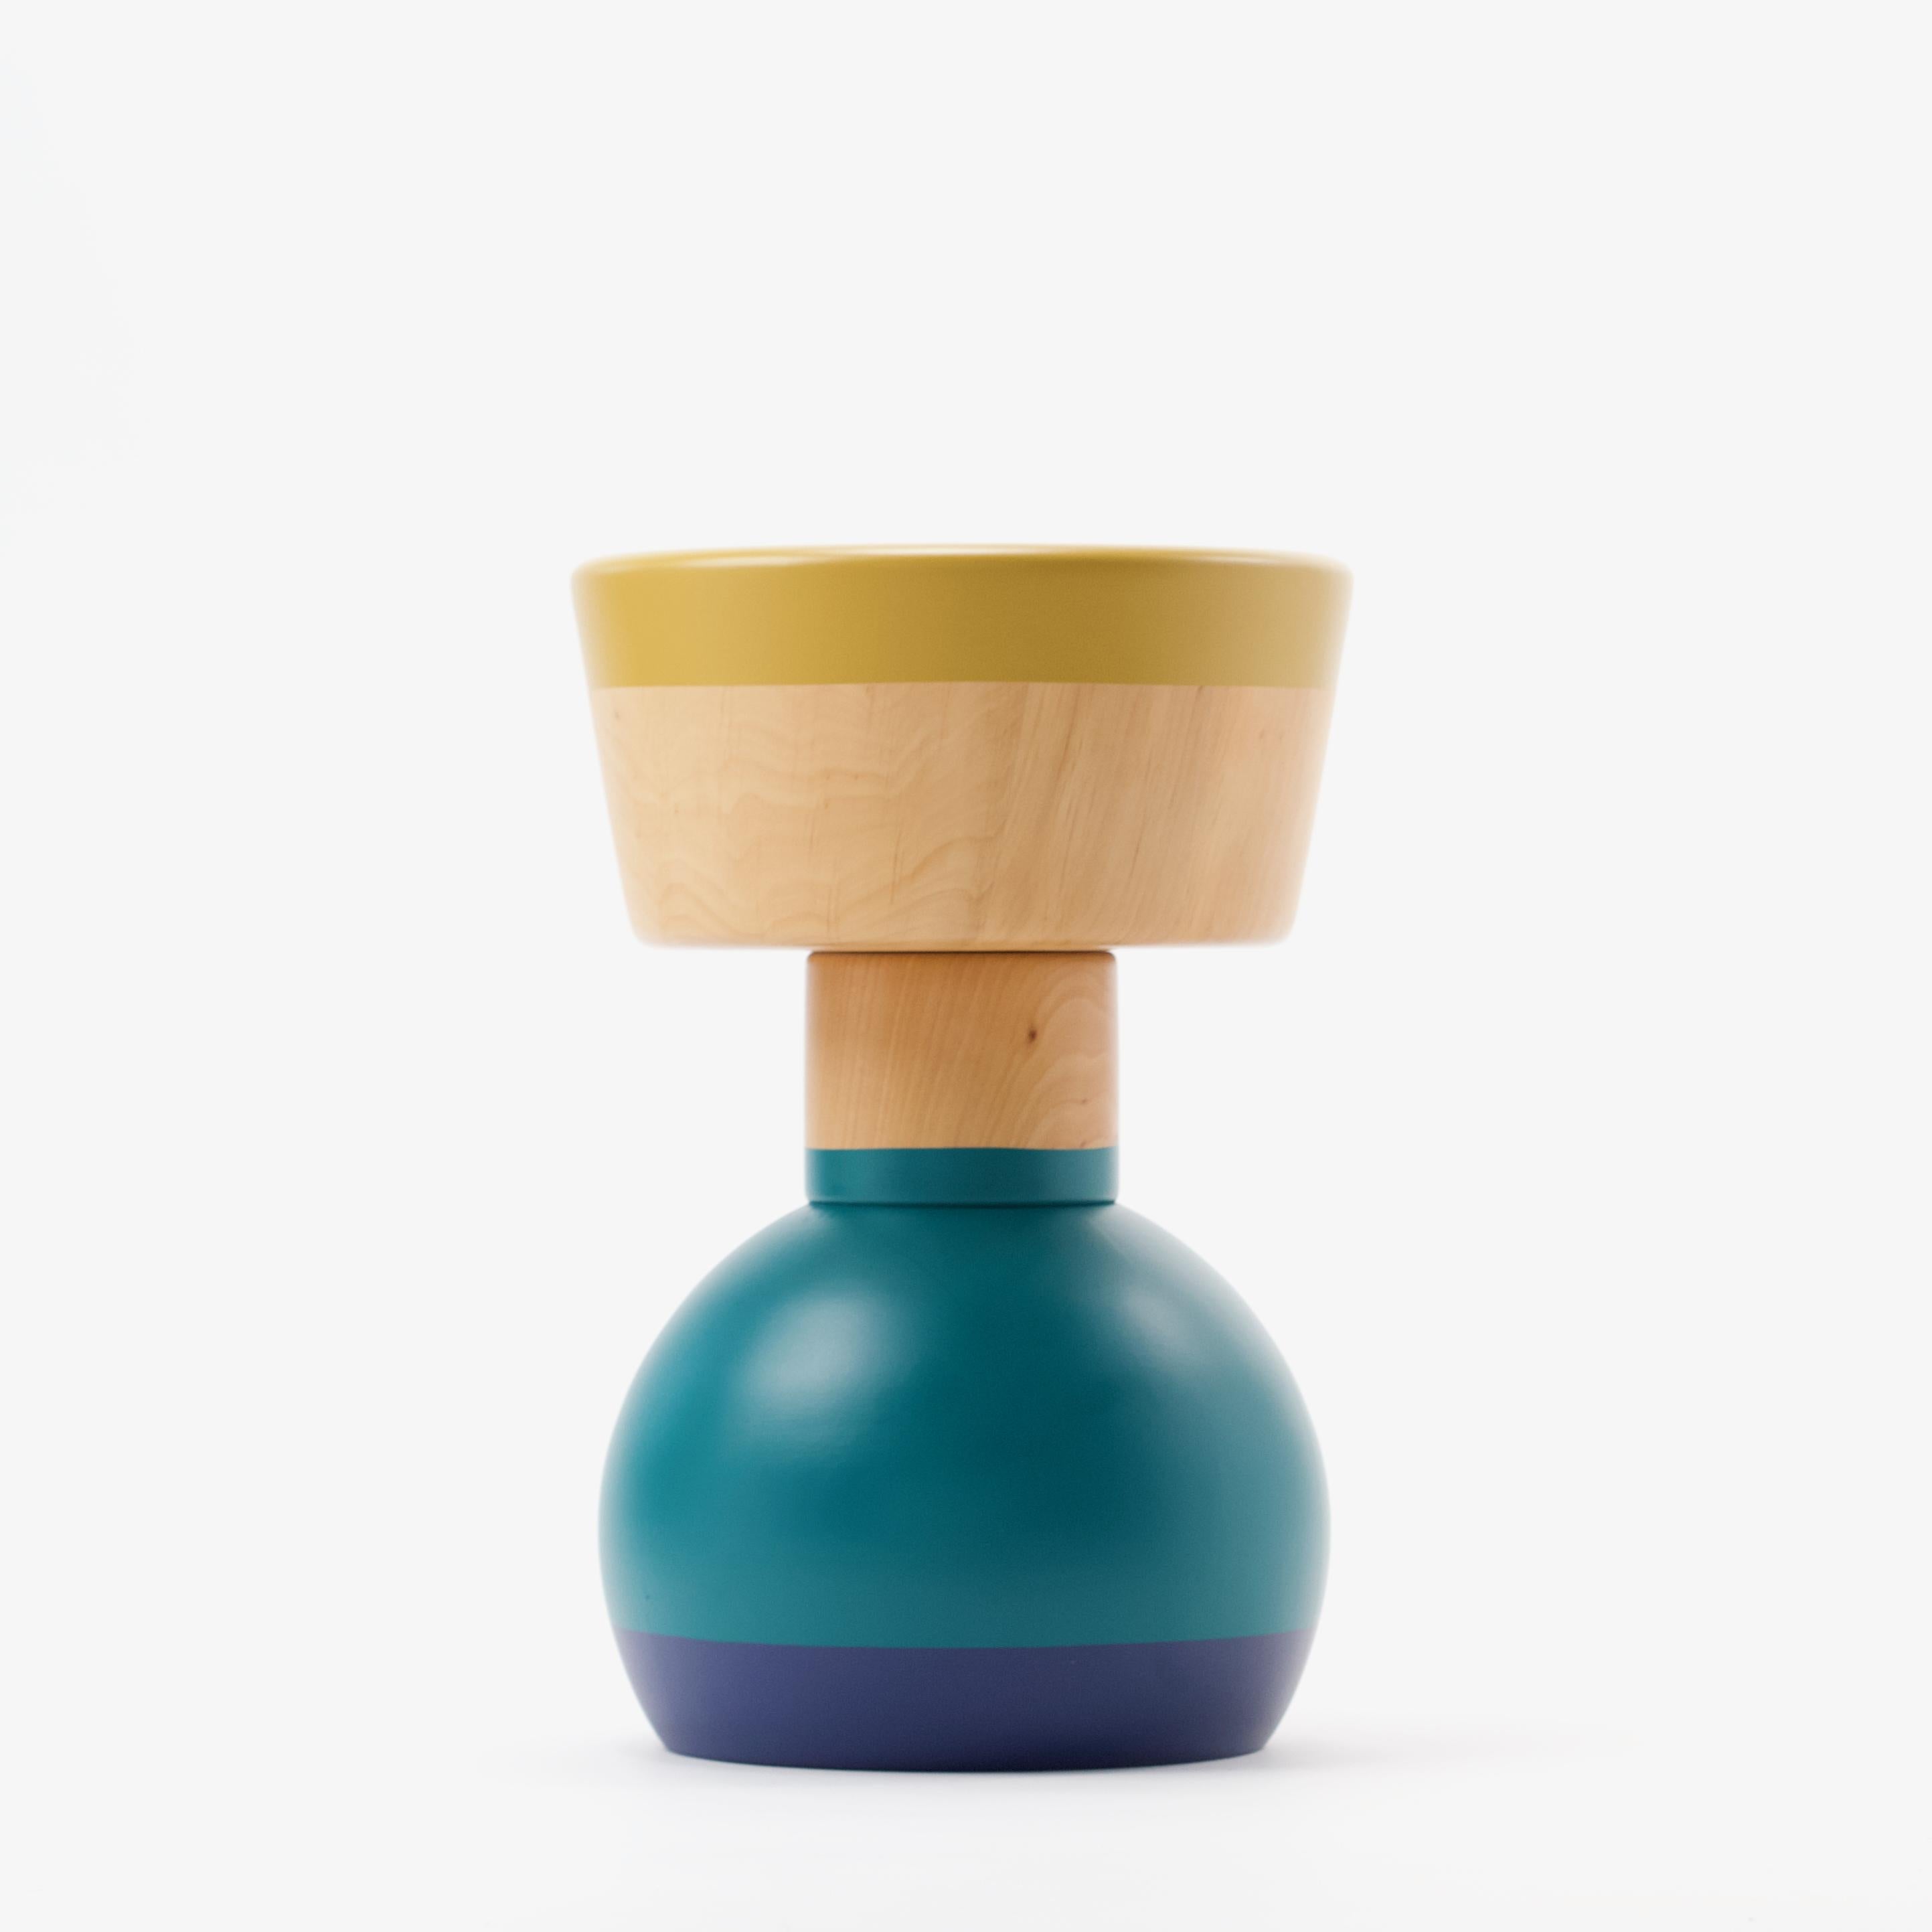 LOLO is a family of objects, stools or side tables all of which are alike, yet different - like you and me. An abstraction about diversification.

Designed by Pernille Iben Linde and Morten Linde. 

Local artisans have hand-turned the object in